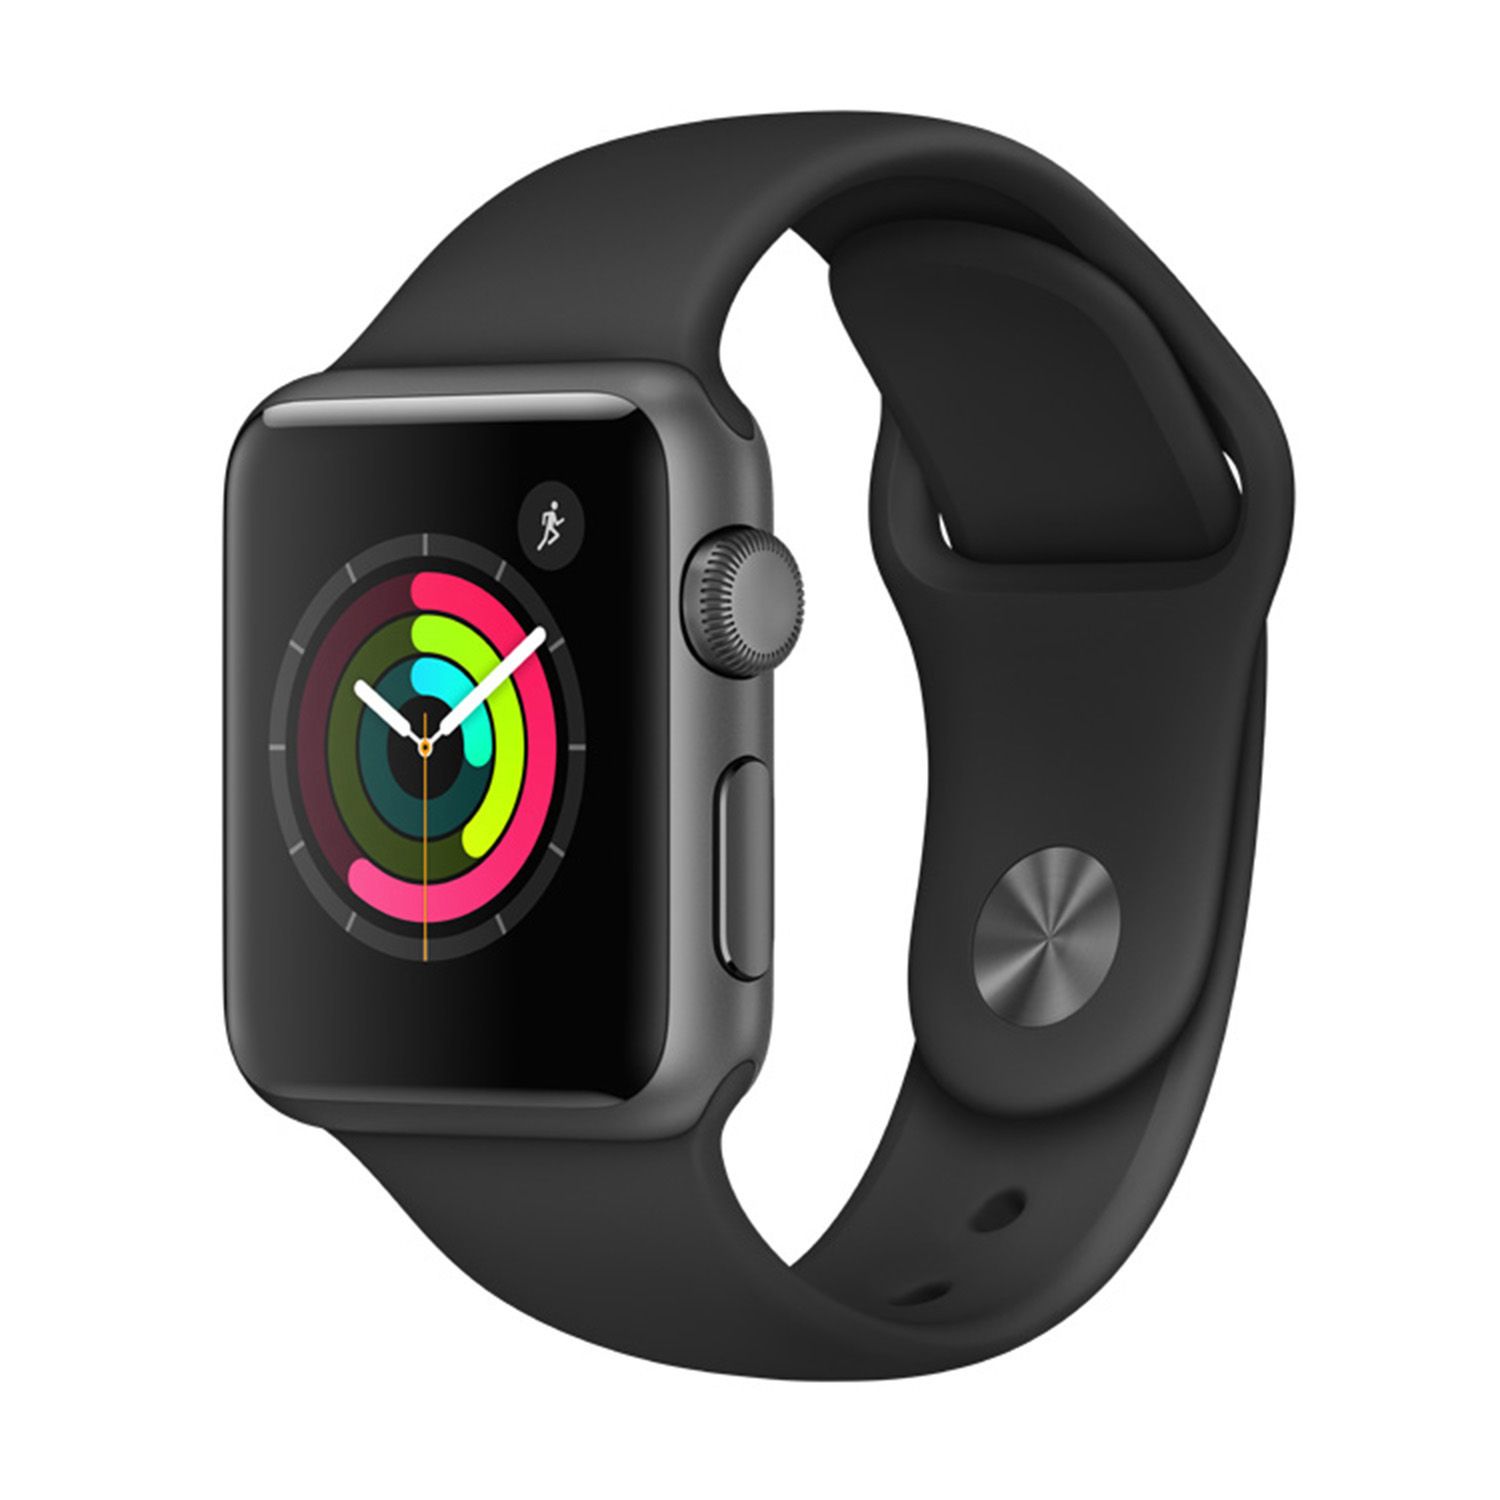 Apple Watch Series 2 (38mm with Space 